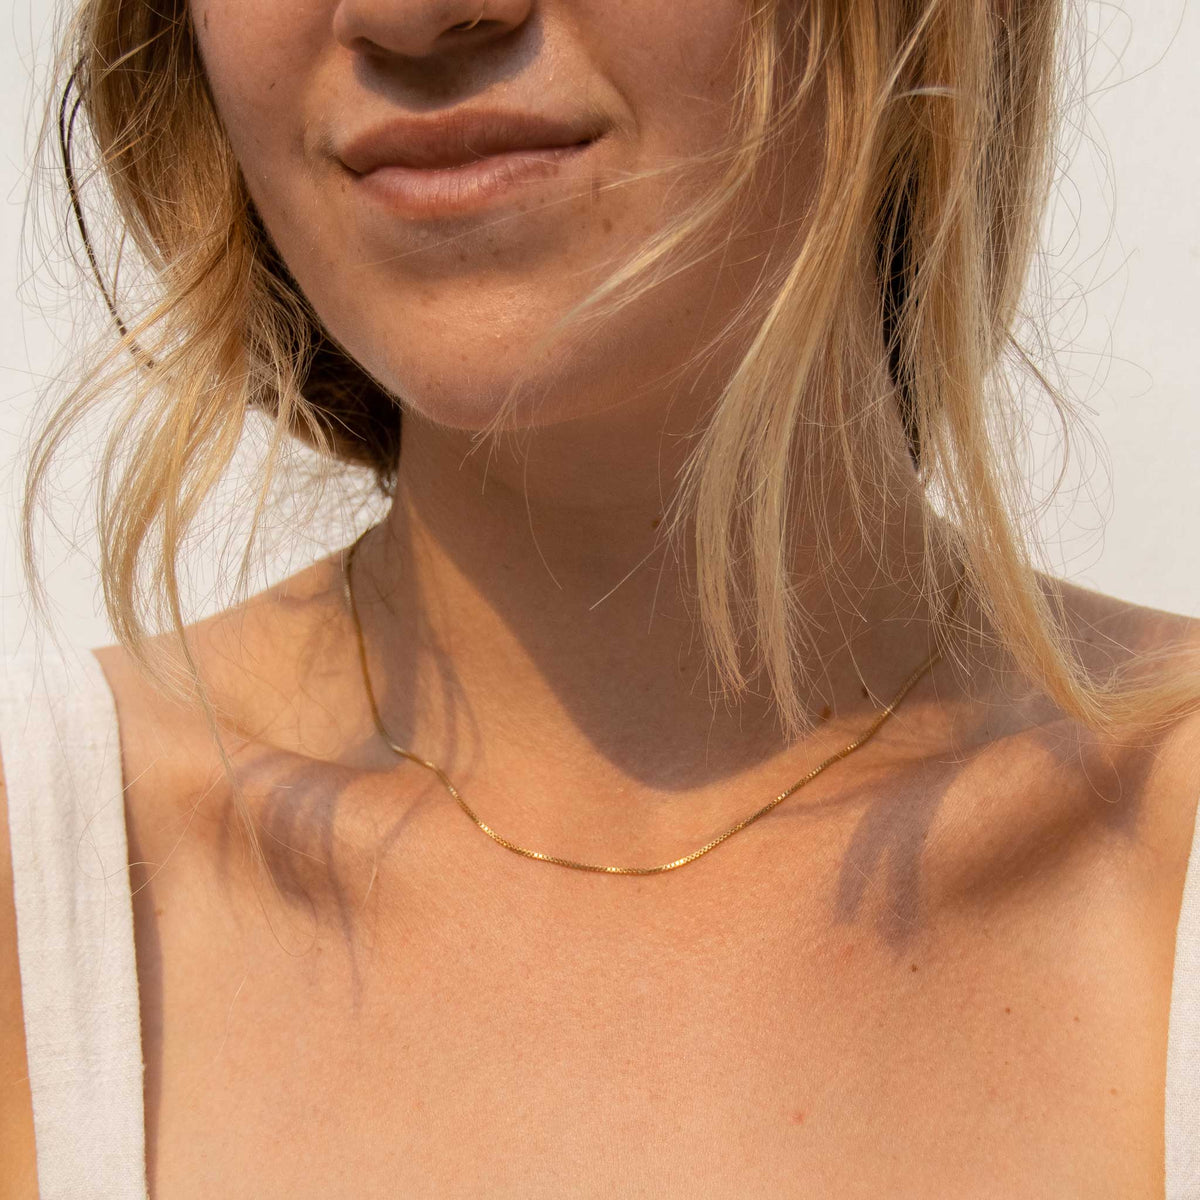 A woman with messy hair wearing just the gold box chain. Only from the nose down is shown.